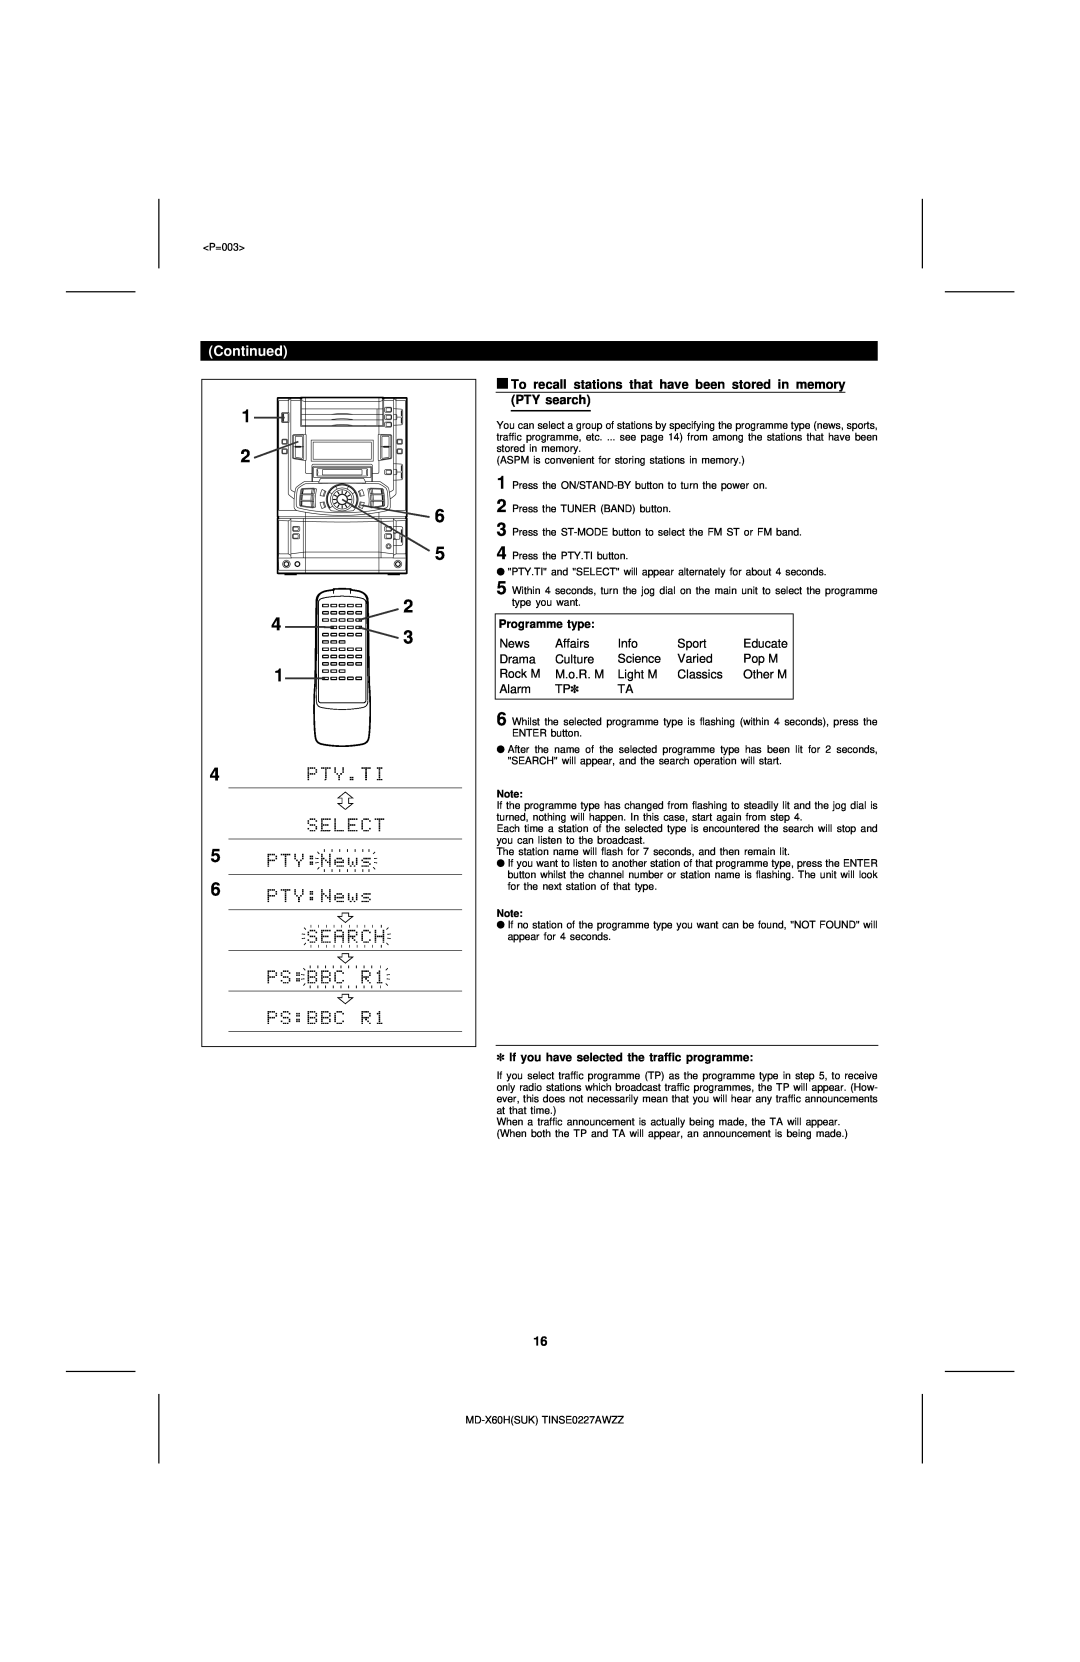 Sharp MD-X60H operation manual Continued 